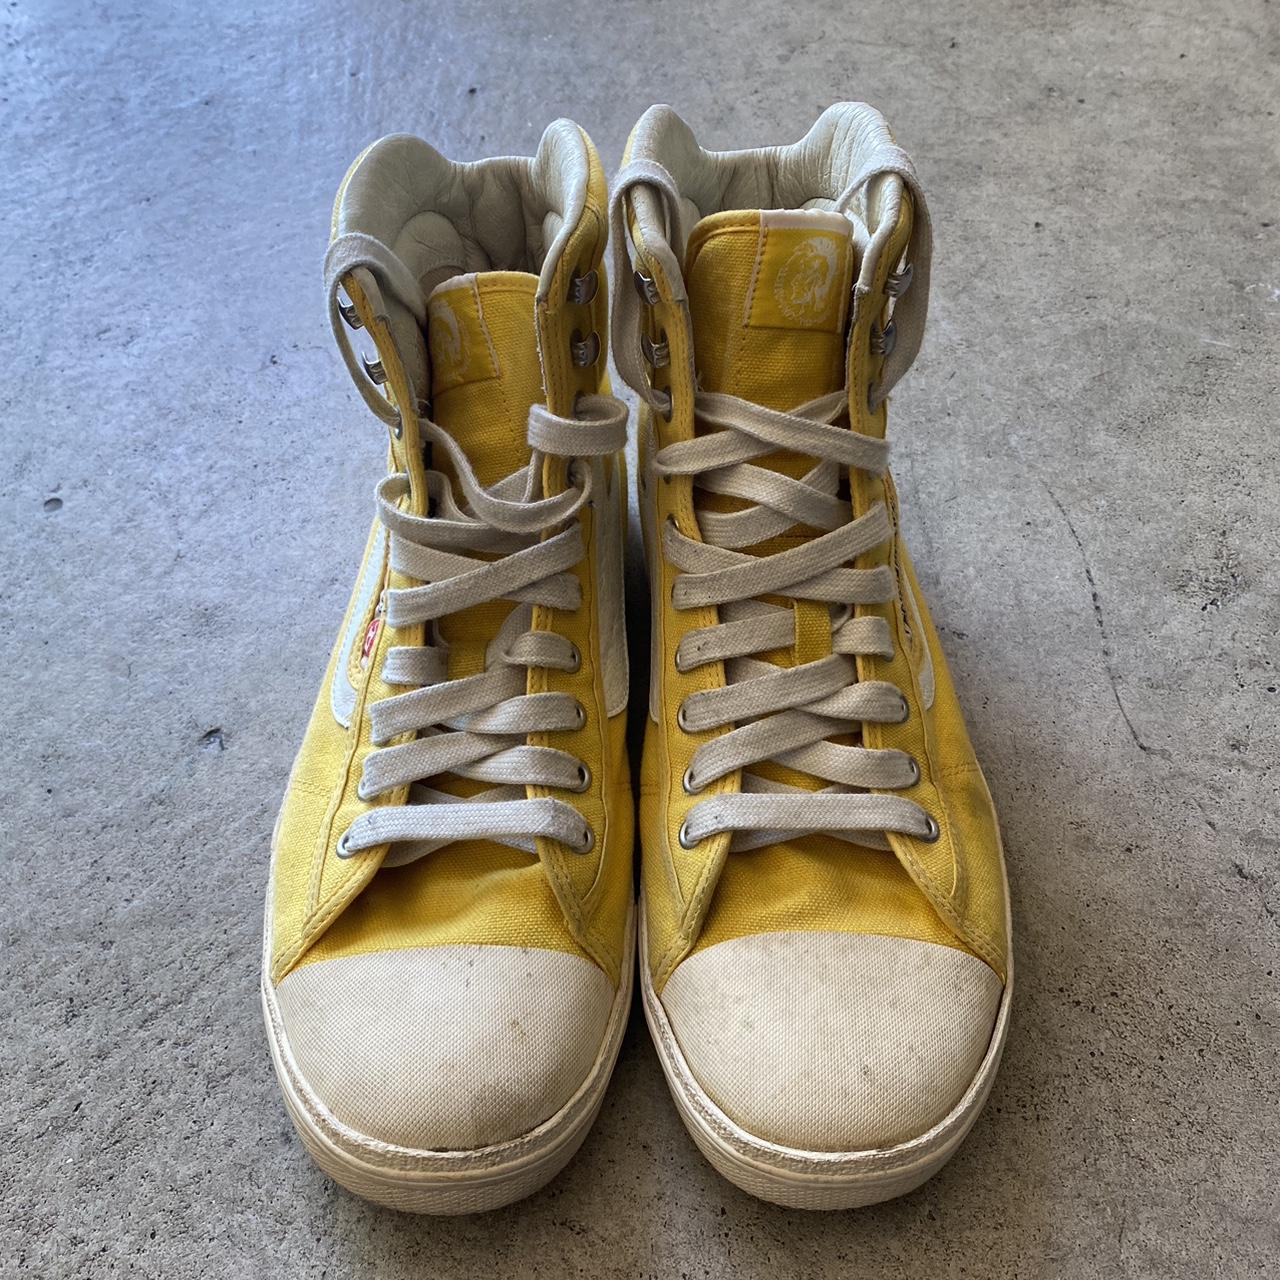 Diesel Men's Yellow and White Trainers | Depop